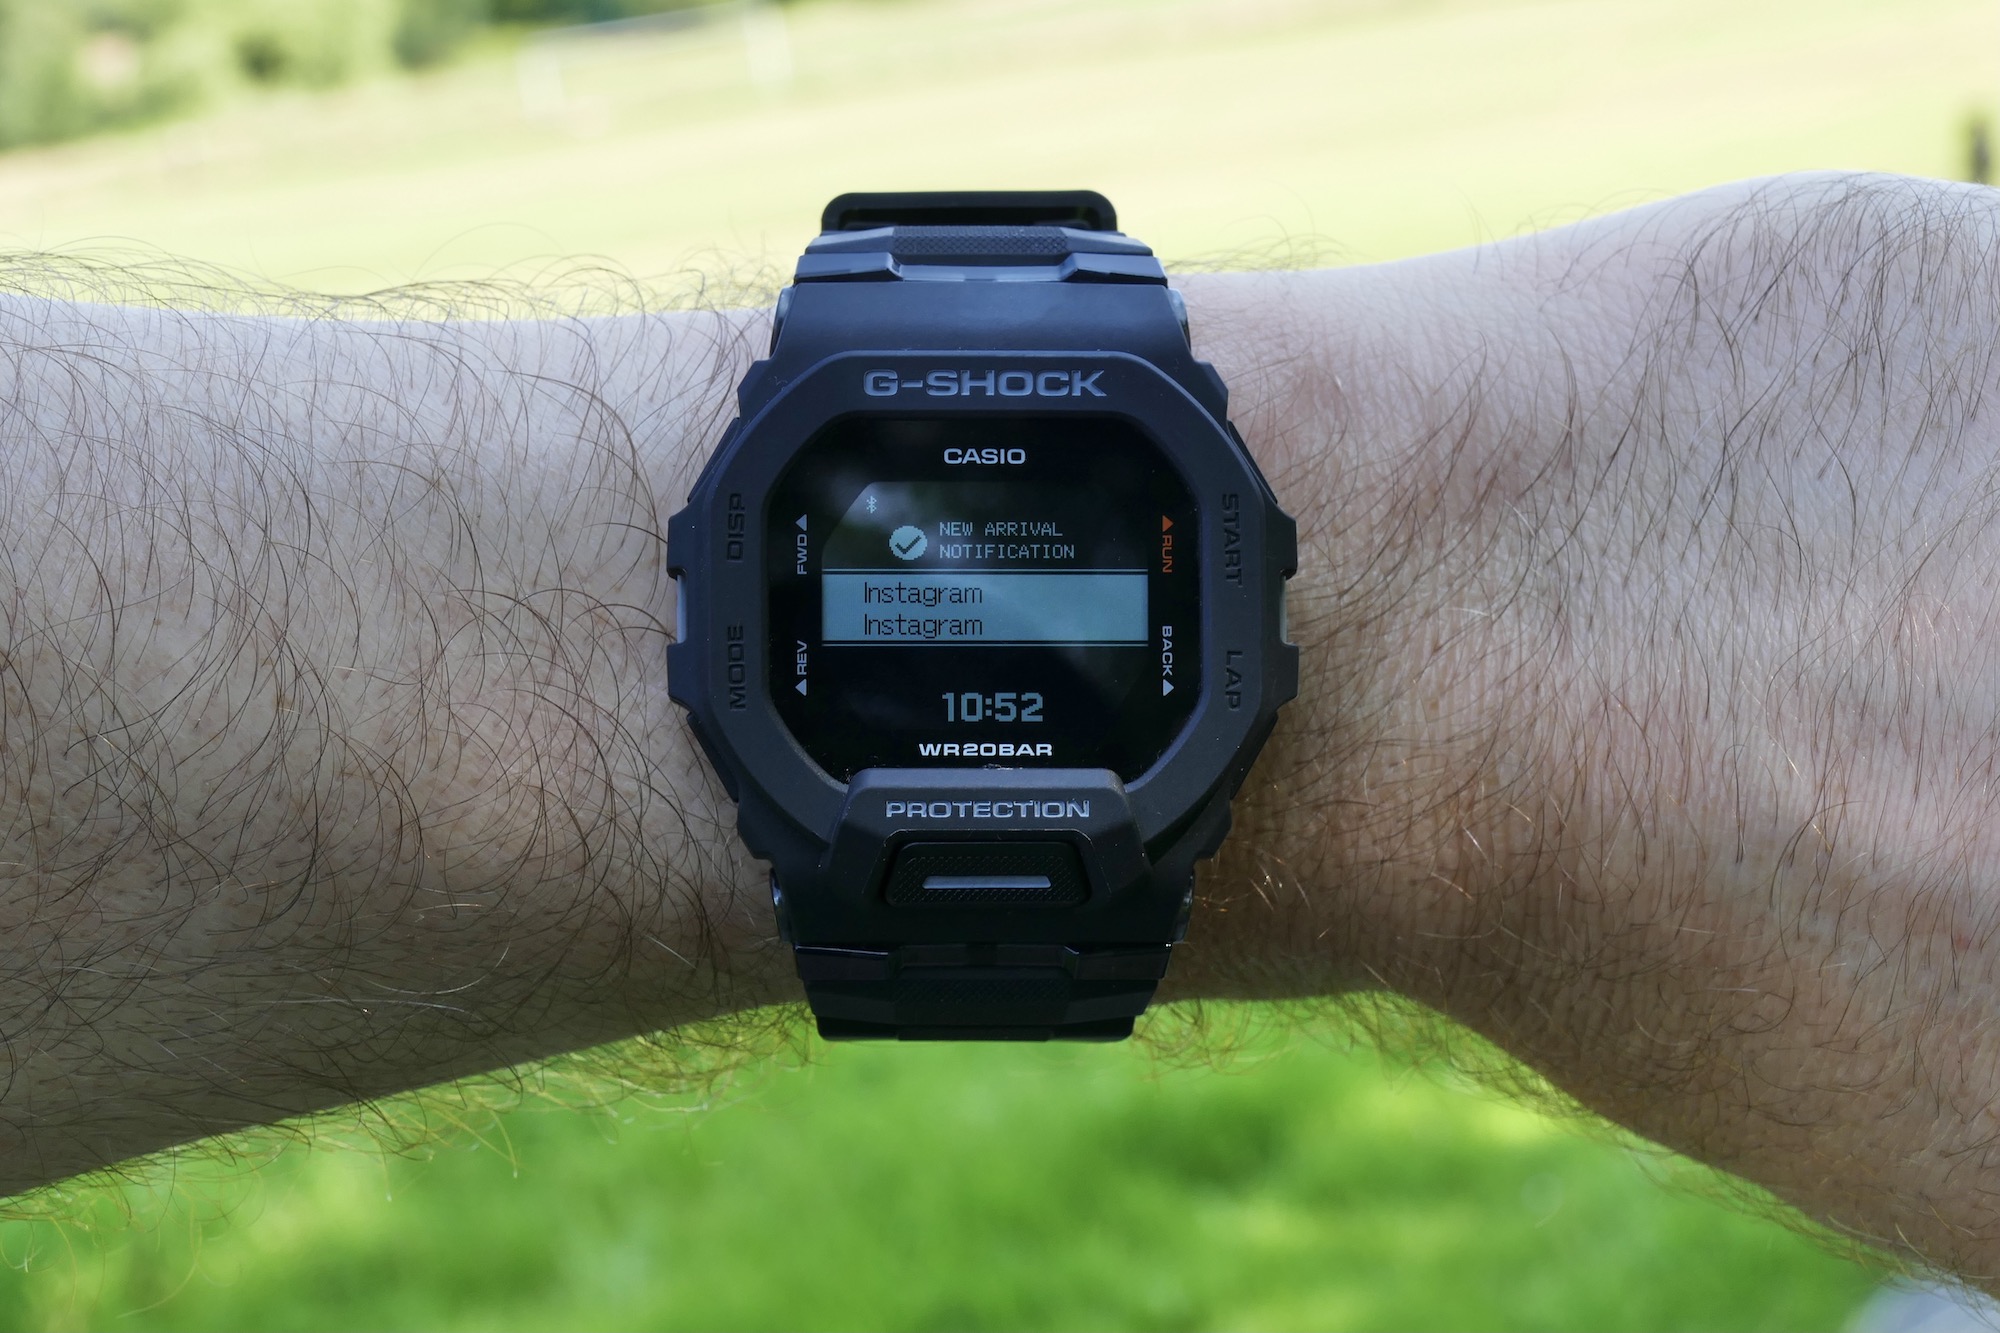 Trends | Review: GBD-200 Digital Balanced G-Shock Perfectly Casio